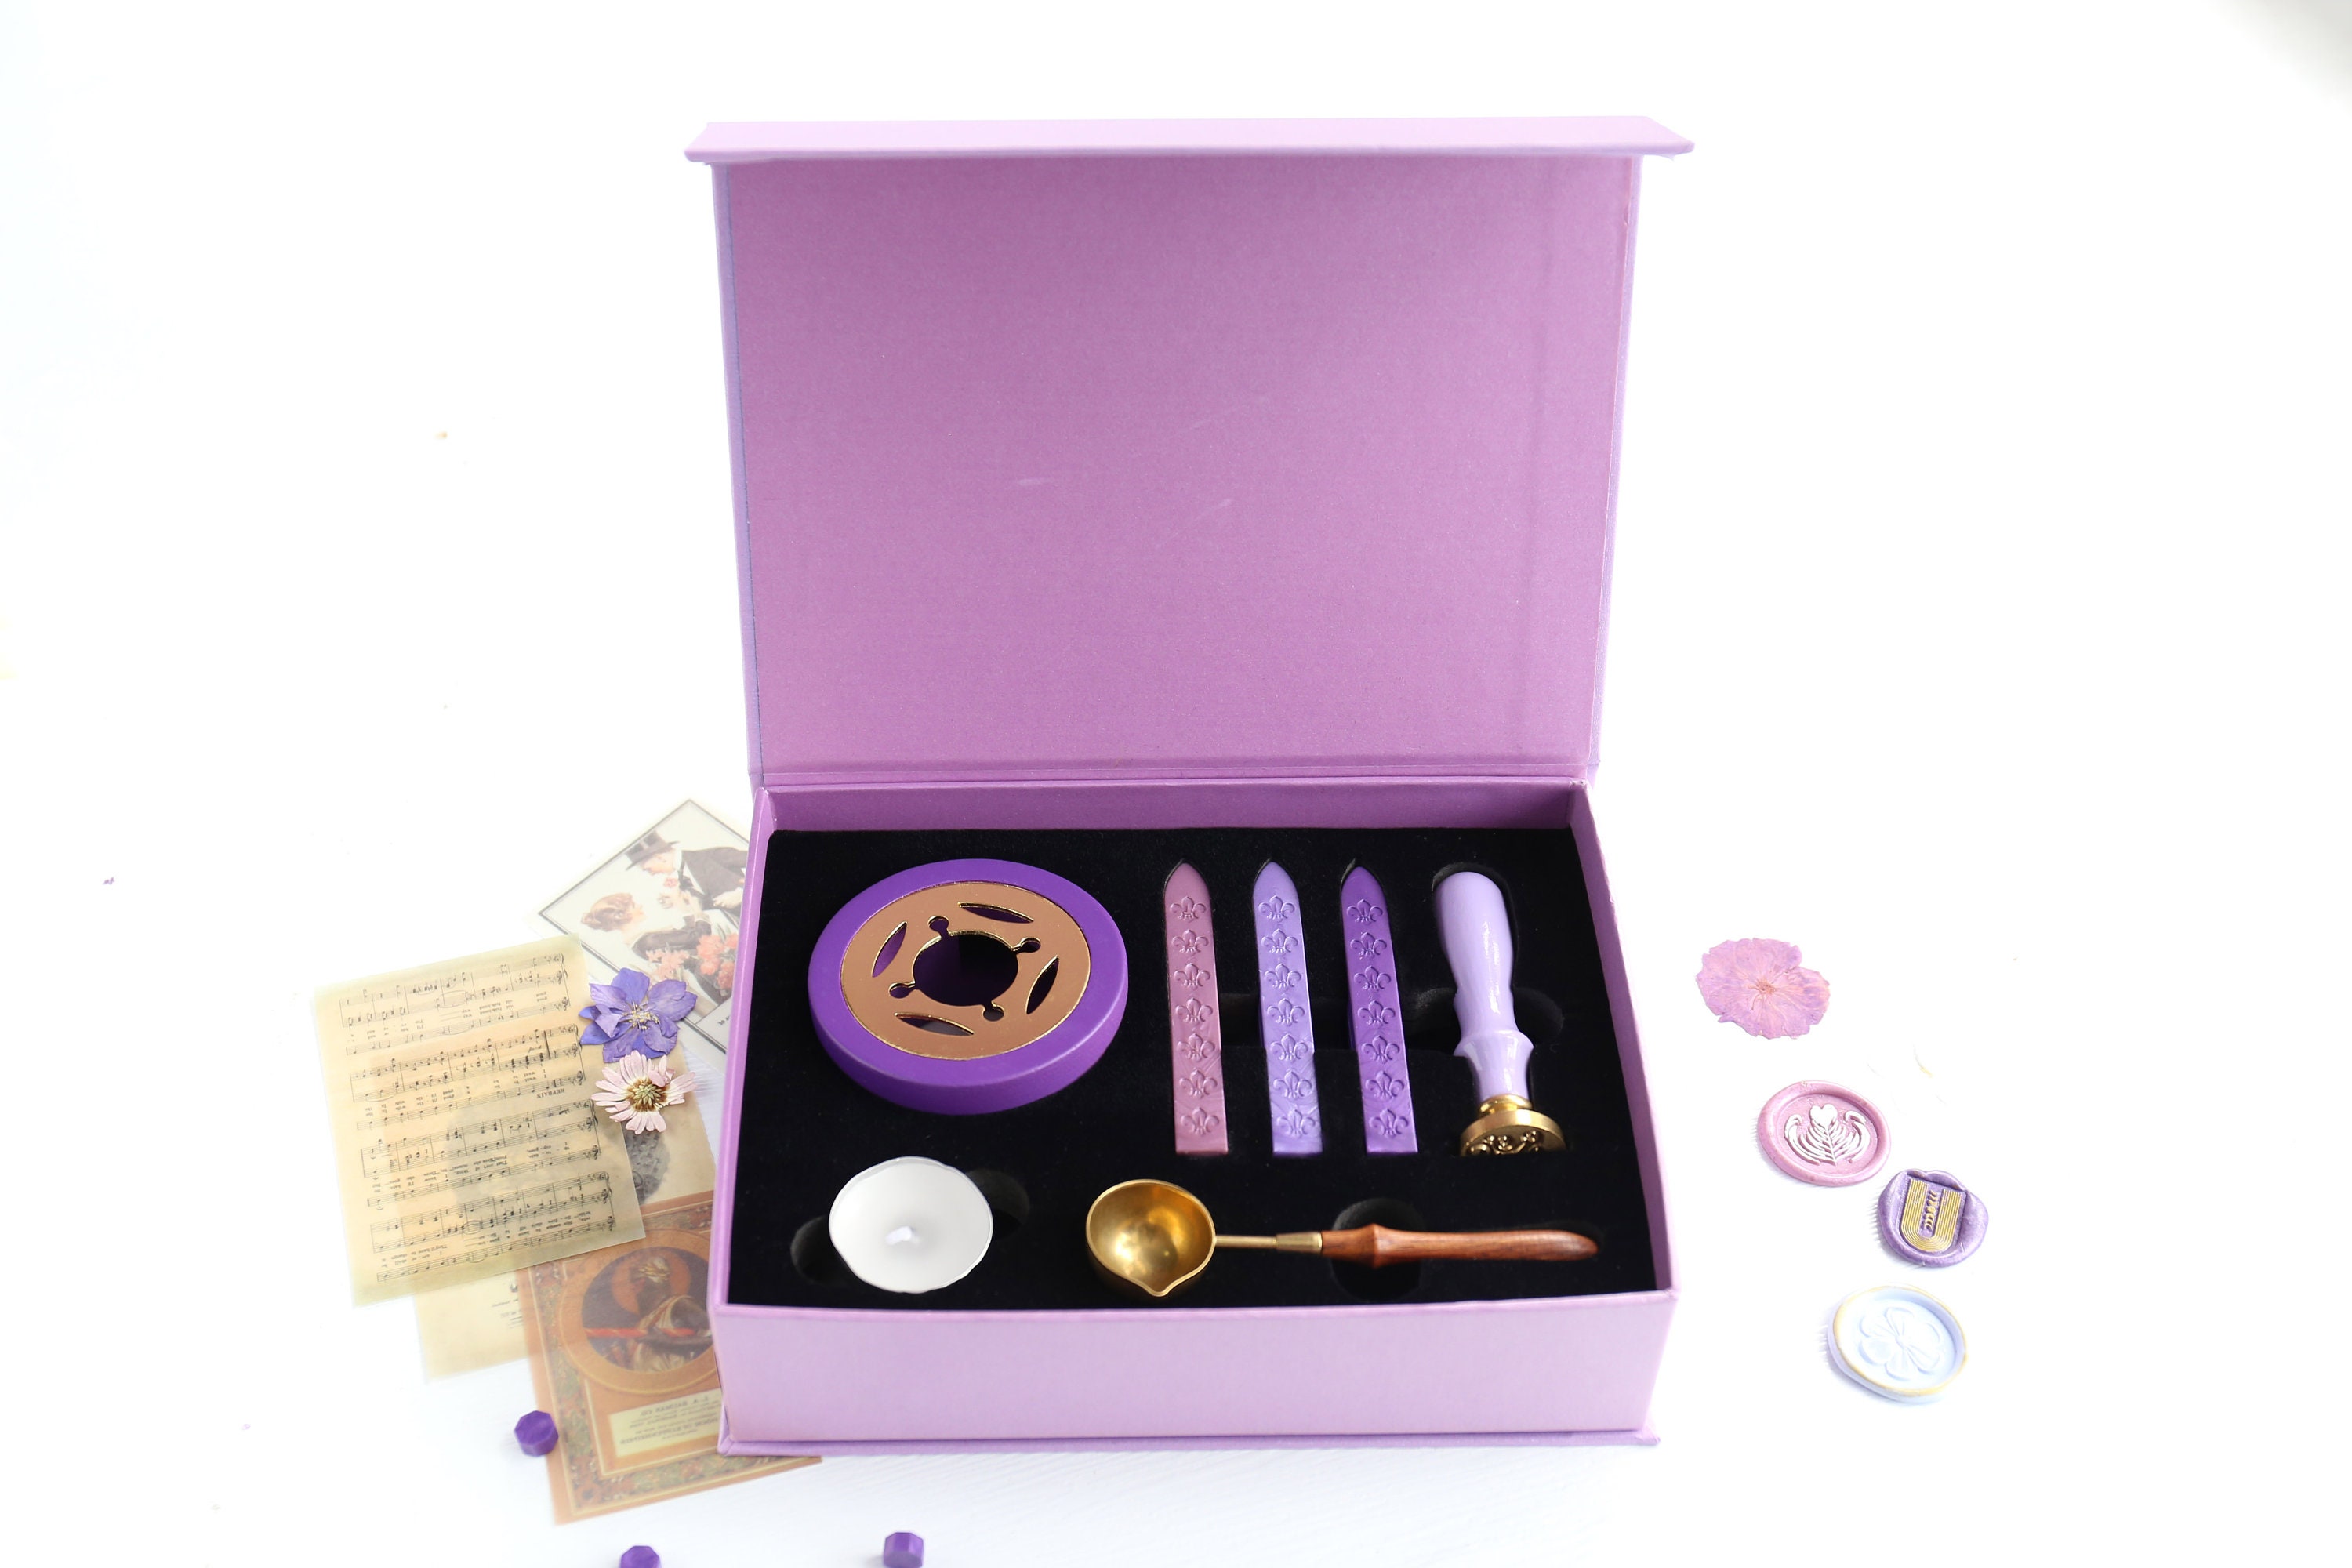 STAMTECH Custom Wax Seal Stamp - Wax Seal Stamp Kit with Gift Box Custom  Wax Stamp Create Your Own Seals Great for Crafting Envelopes Gift Wrap